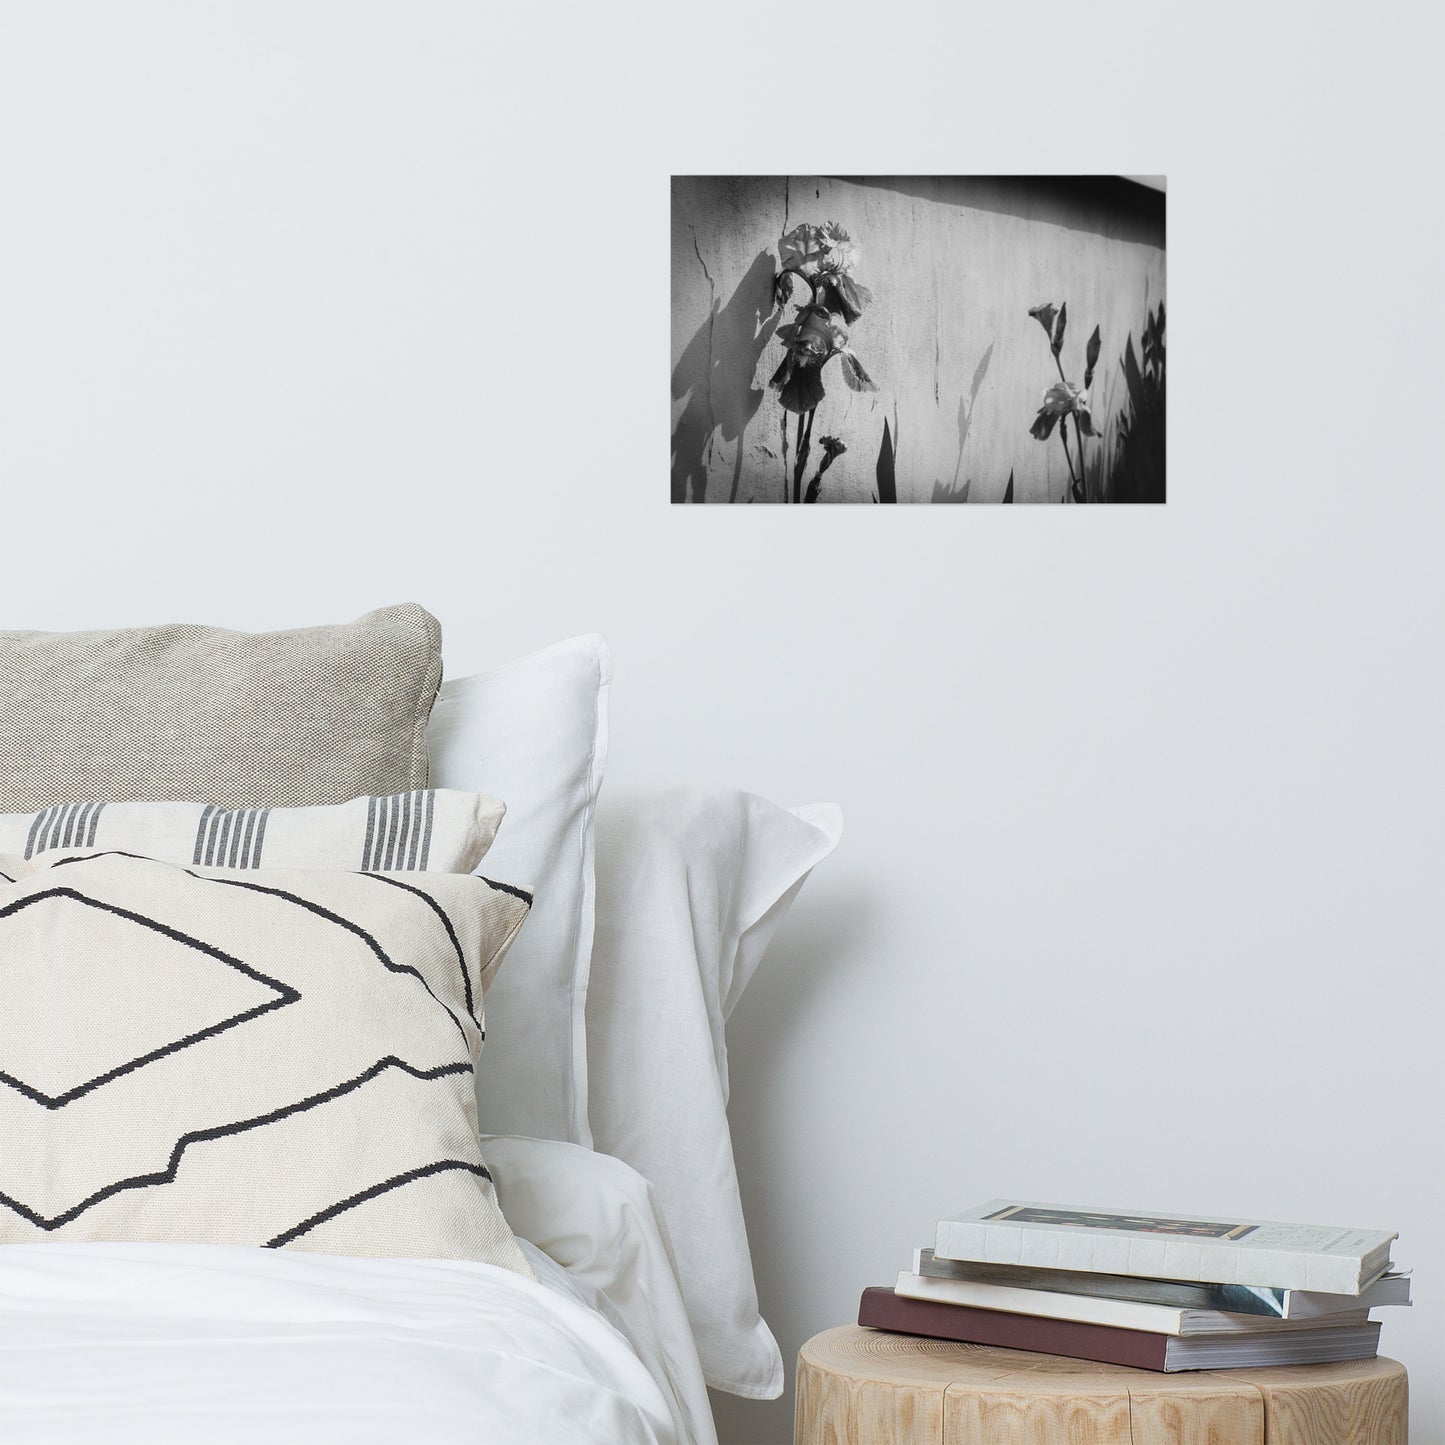 Iris on Wall Black and White Floral Nature Photo Loose Unframed Wall Art Prints